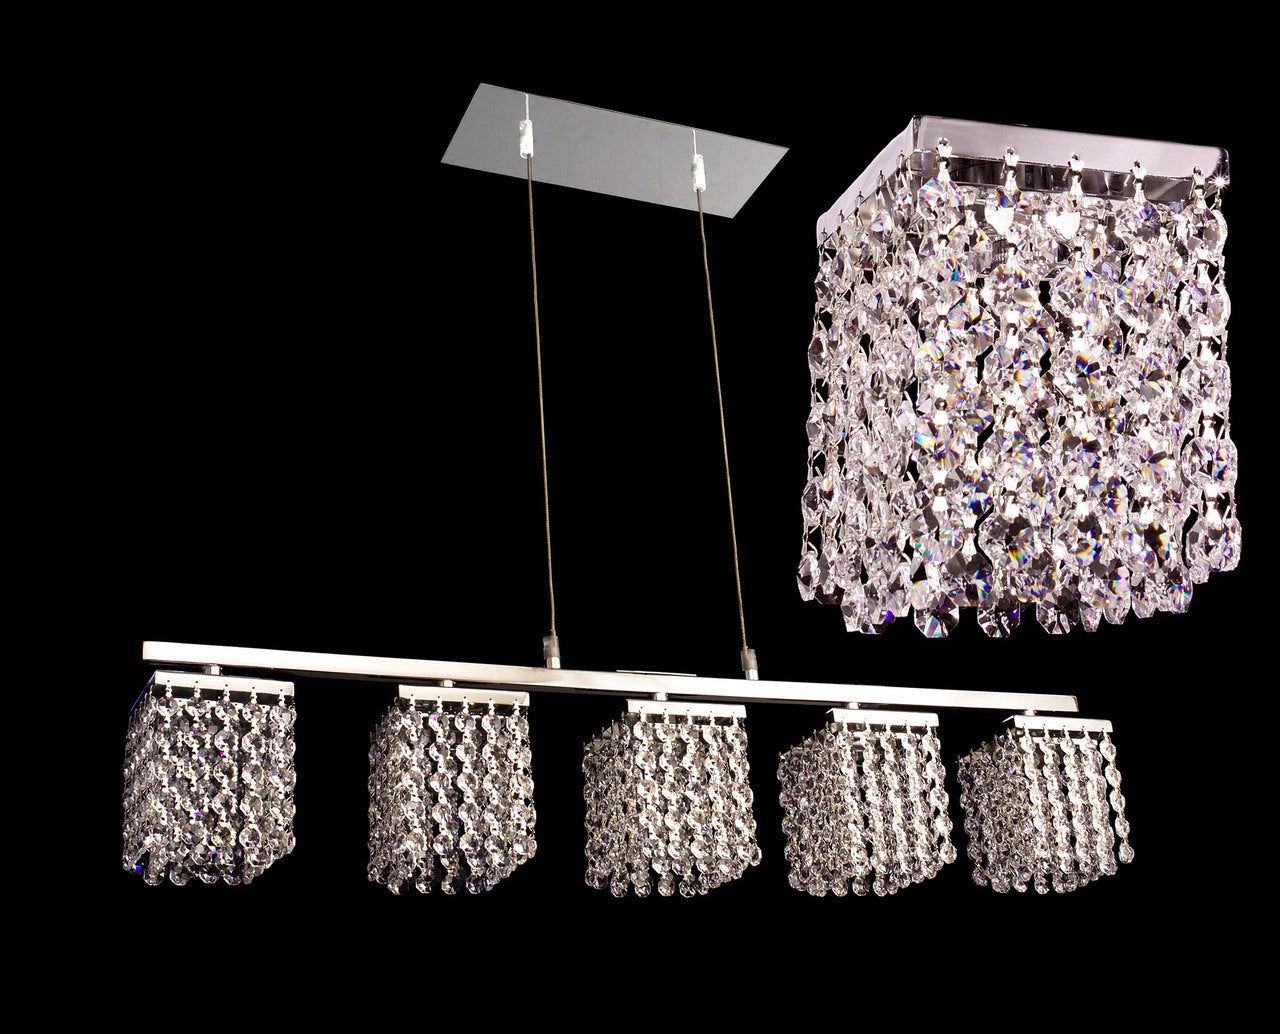 Classic Lighting 16105 CP-SMK Bedazzle Crystal Linear Chandelier in Chrome